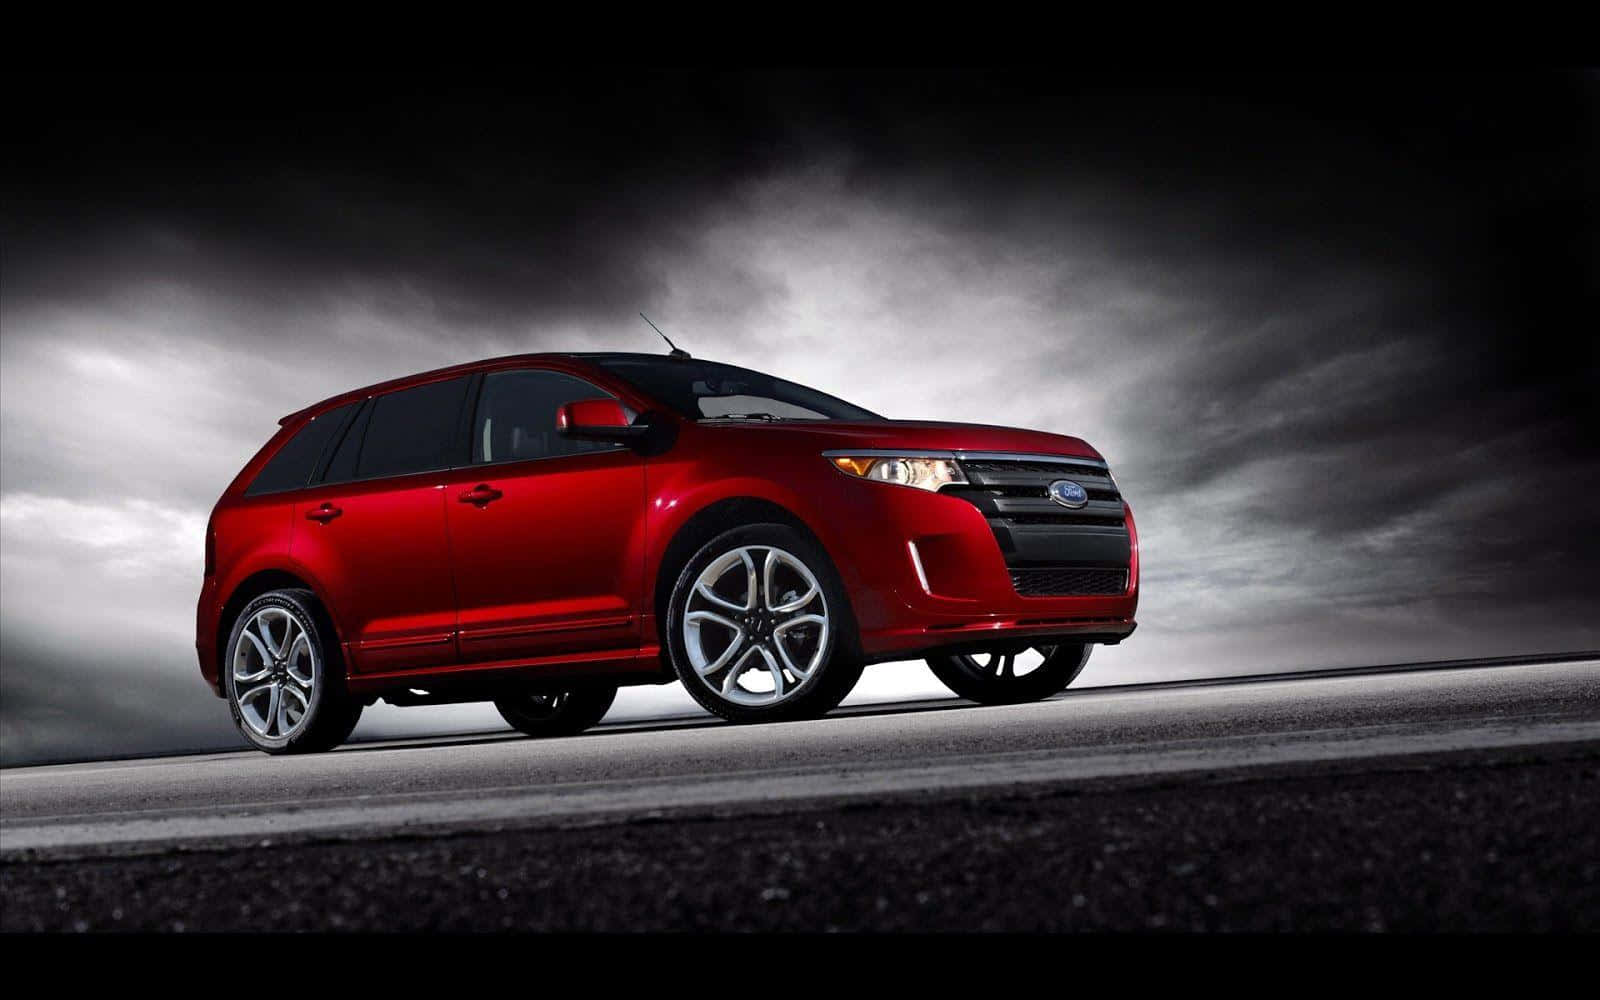 Sleek Ford Edge driving on a scenic road Wallpaper